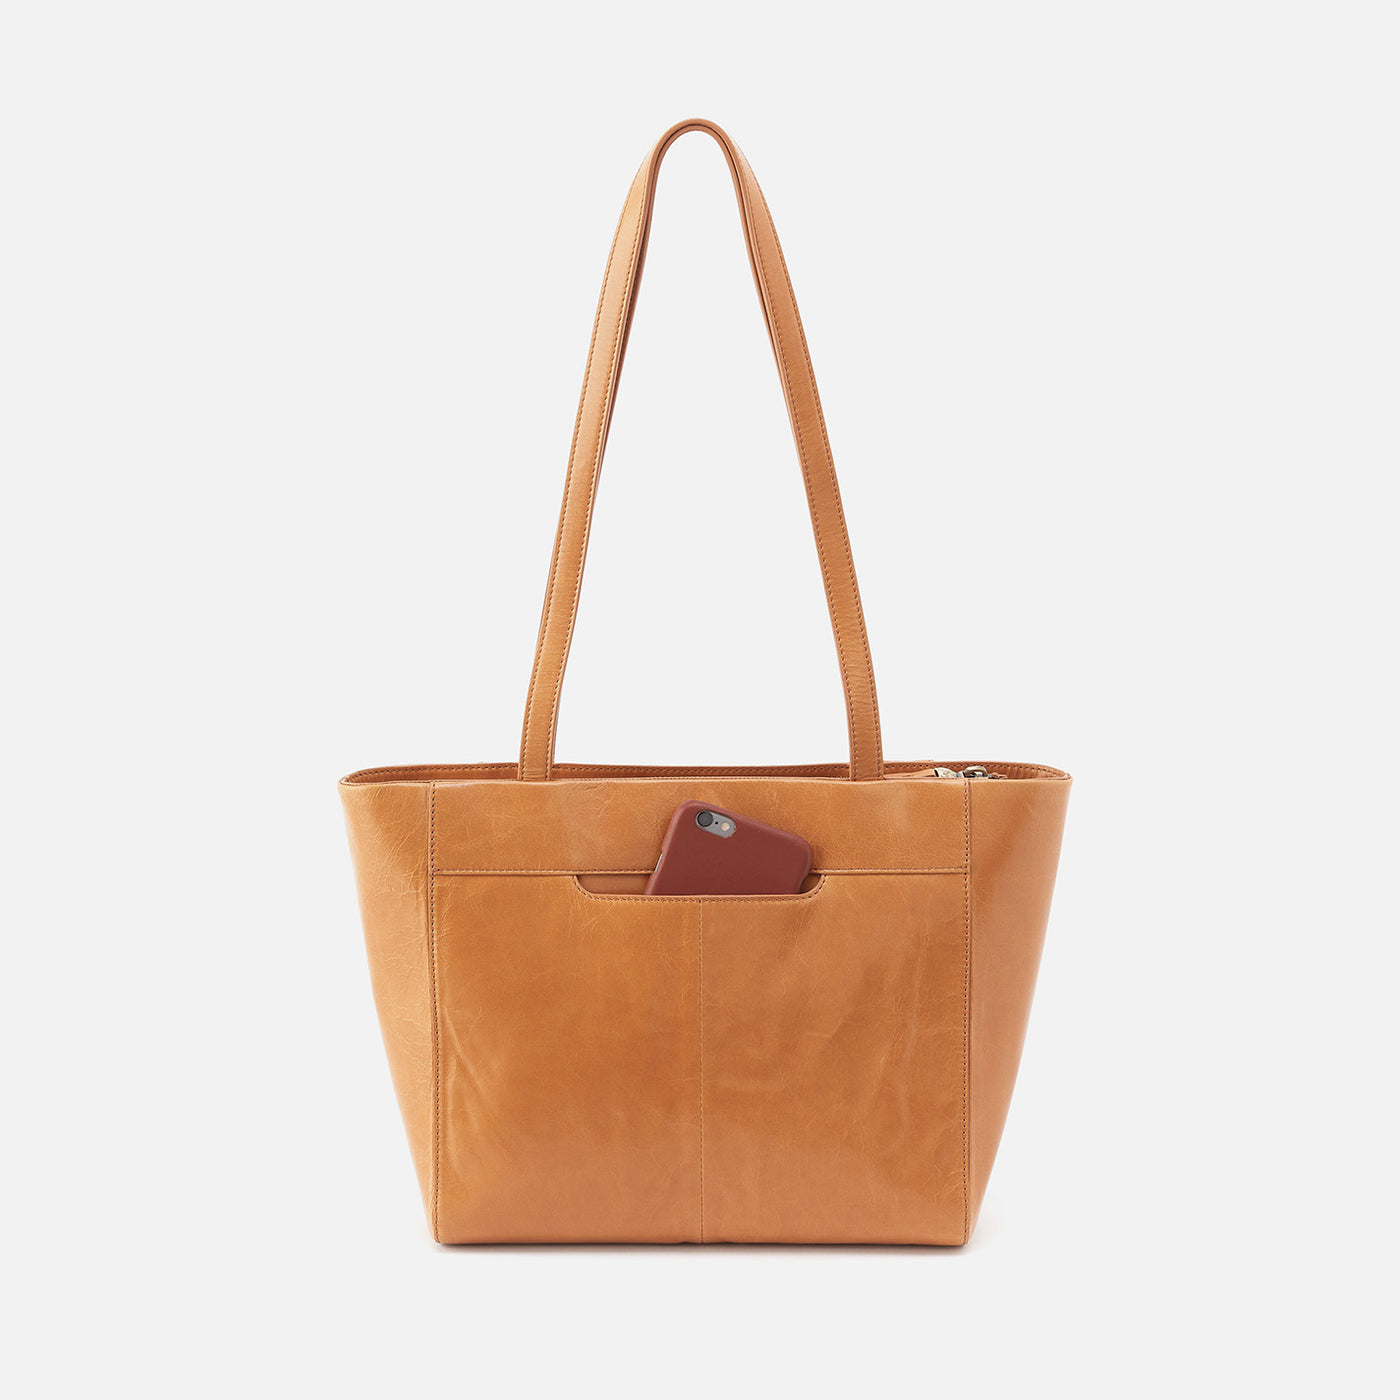 Haven Tote in Polished Leather - Natural